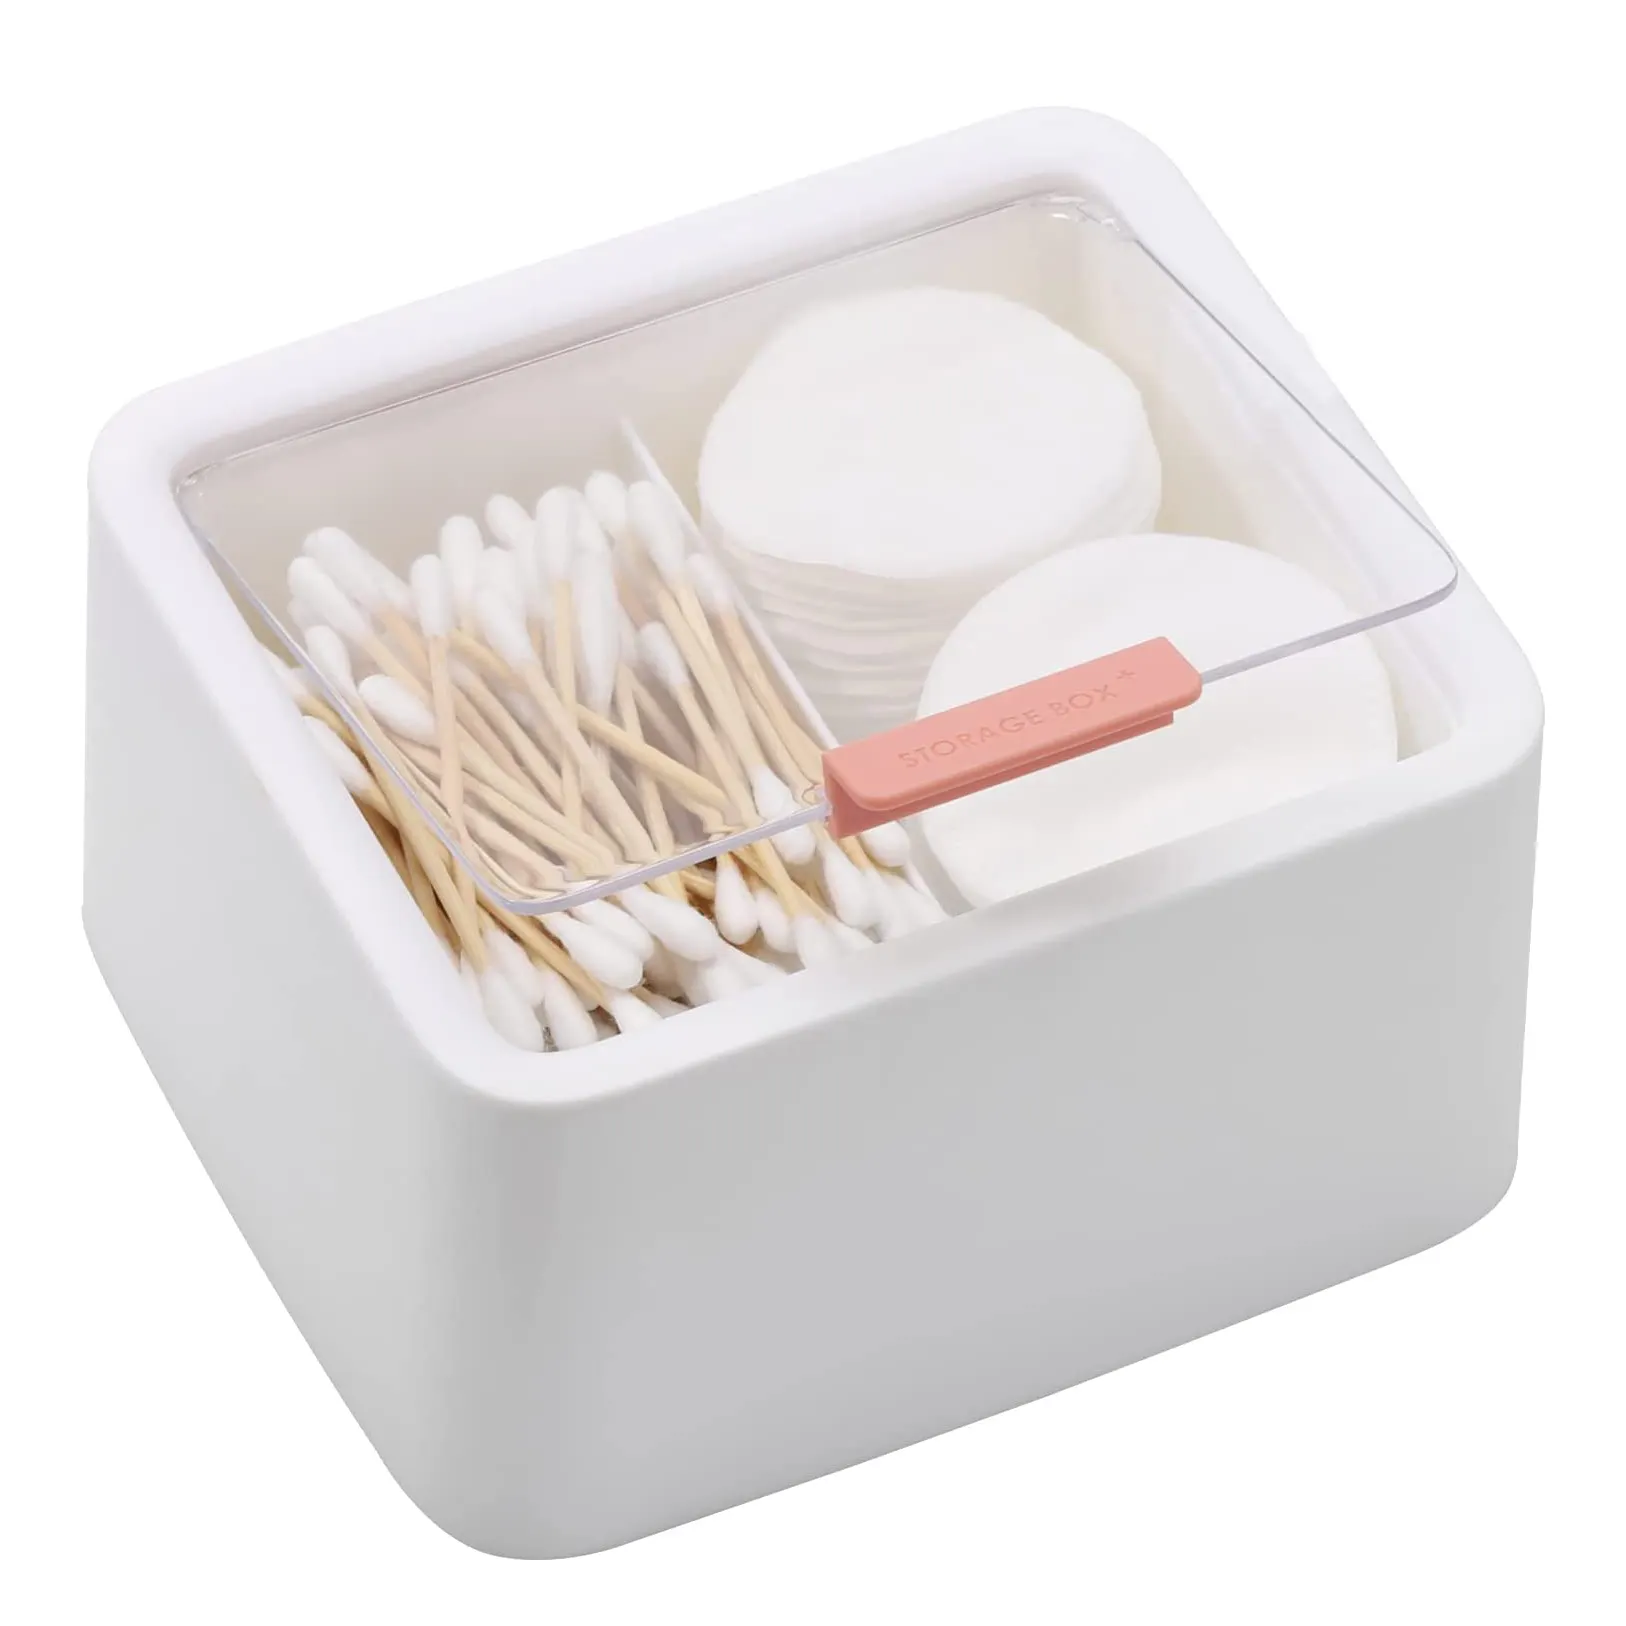 2 Slot Cotton Swab Ball Qtip Holder Jar Plastic Container Dispenser Box with Hinged Lid for Bathroom Home Storage Organizer